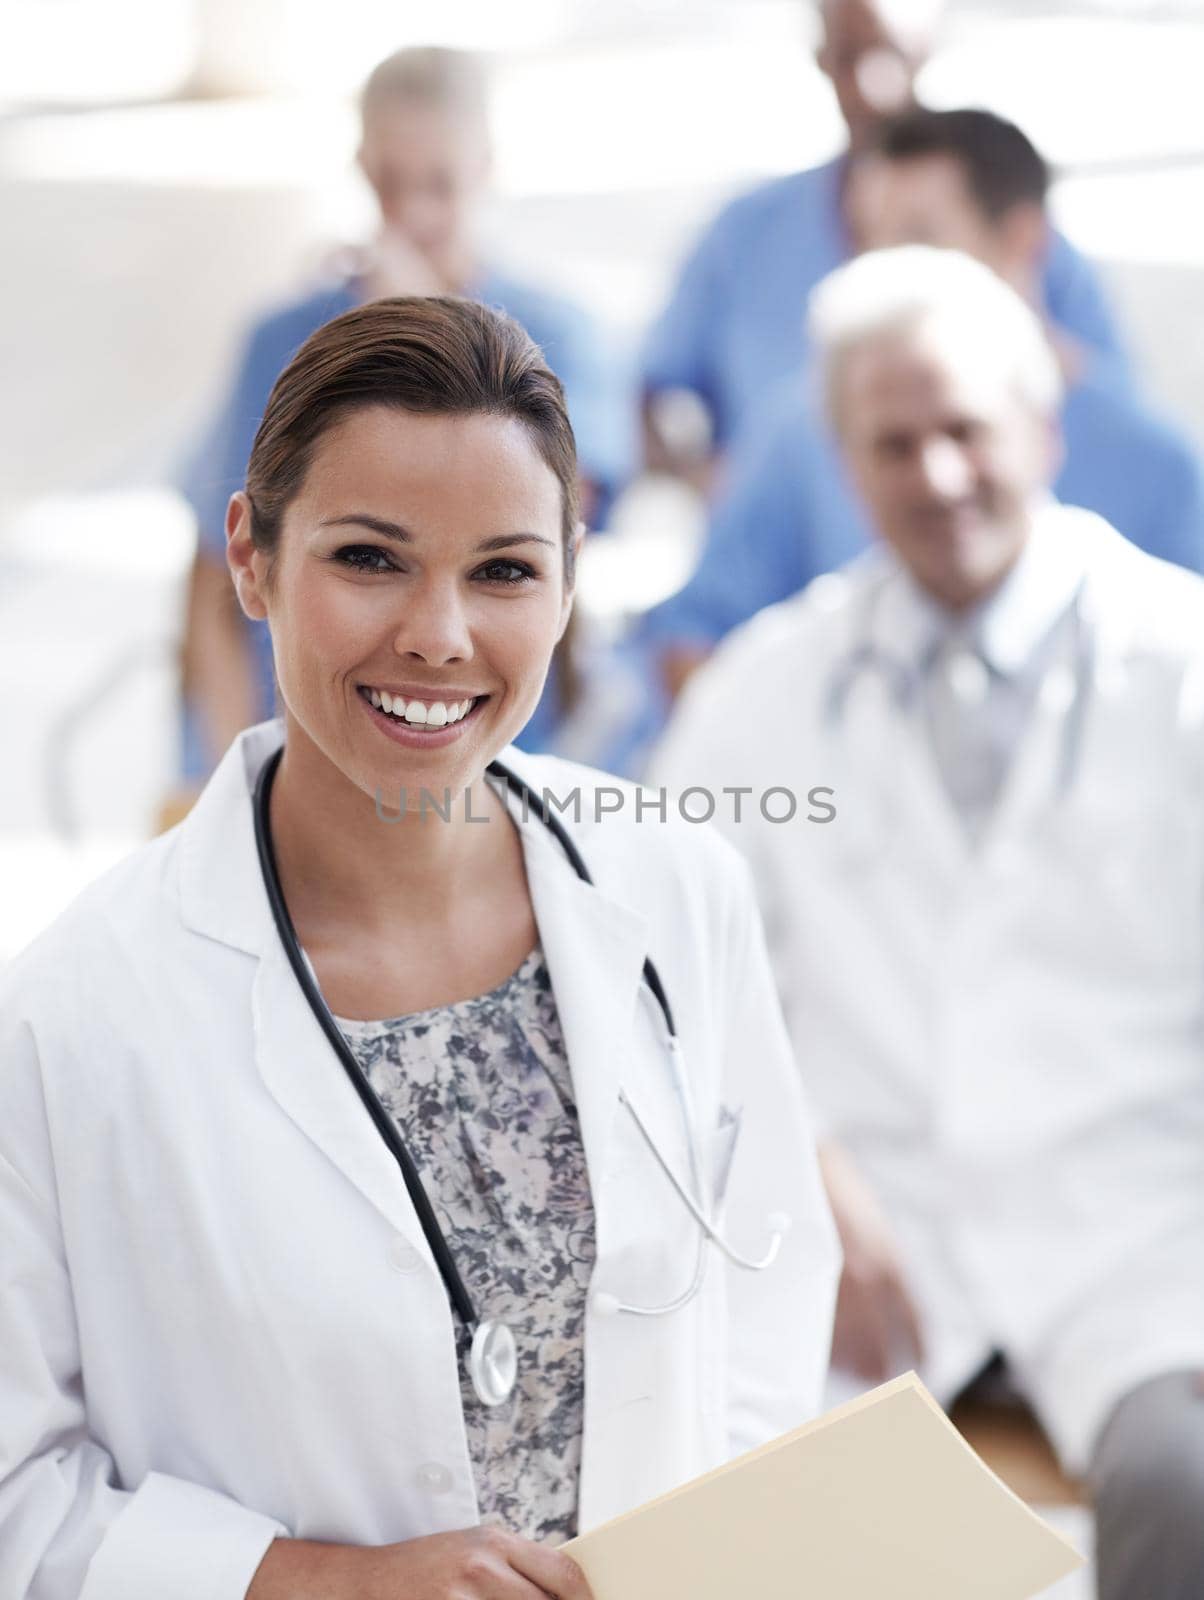 Looking after all your medical needs. A doctor standing with colleagues sitting in the background. by YuriArcurs